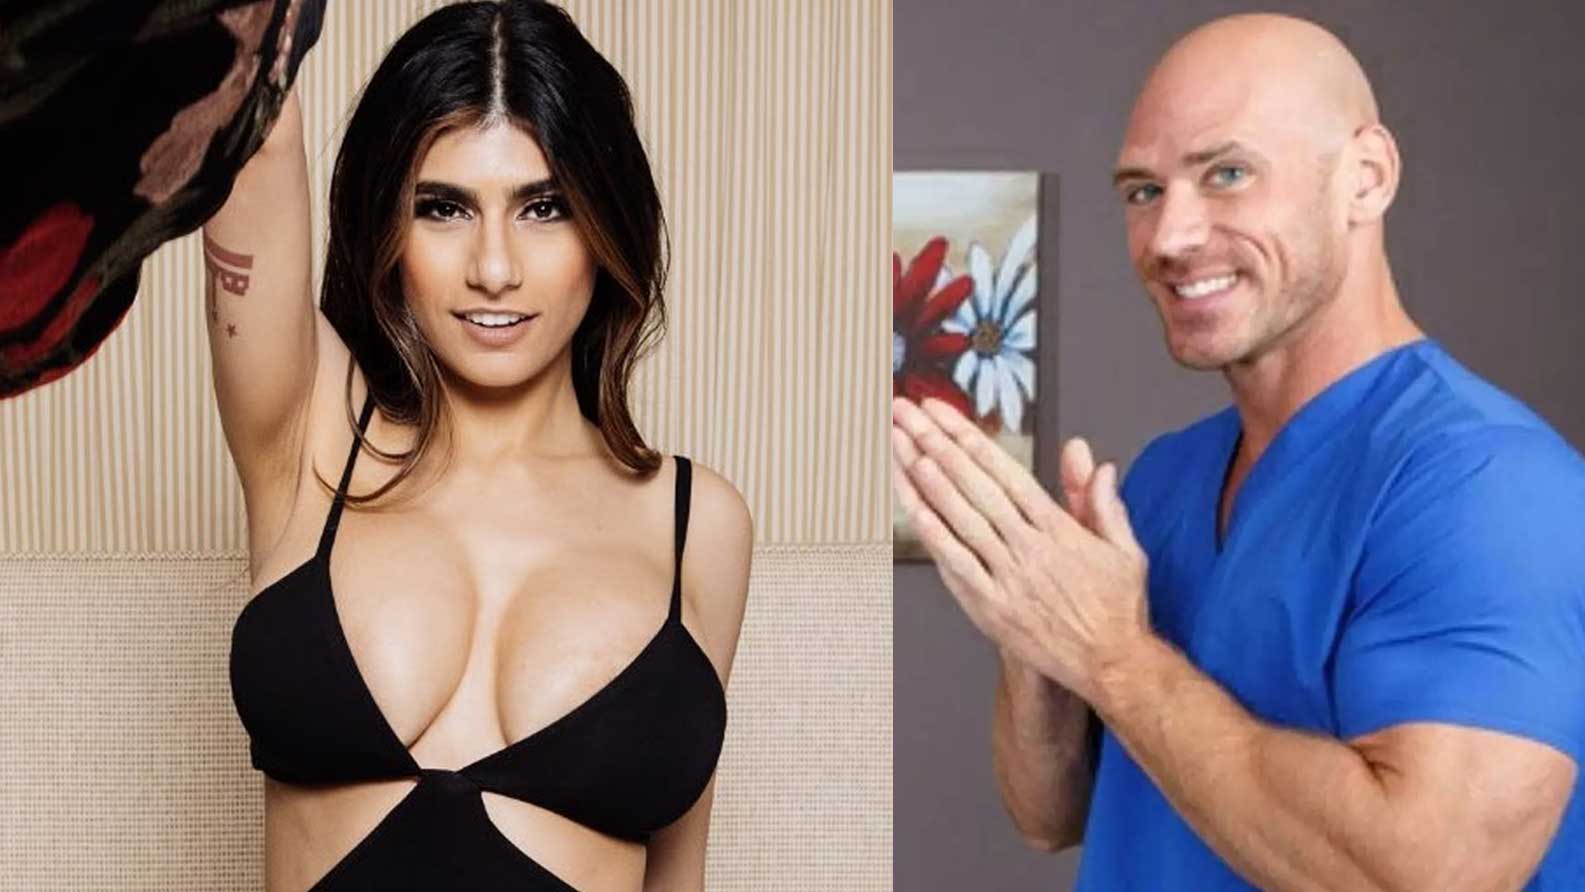 Mia khalif porn salary Former Porn Star Mia Khalifa Reveals Her Total Income From Working In Adult Film Industry Jonny Sins Reacts English Movie News Hollywood Times Of India